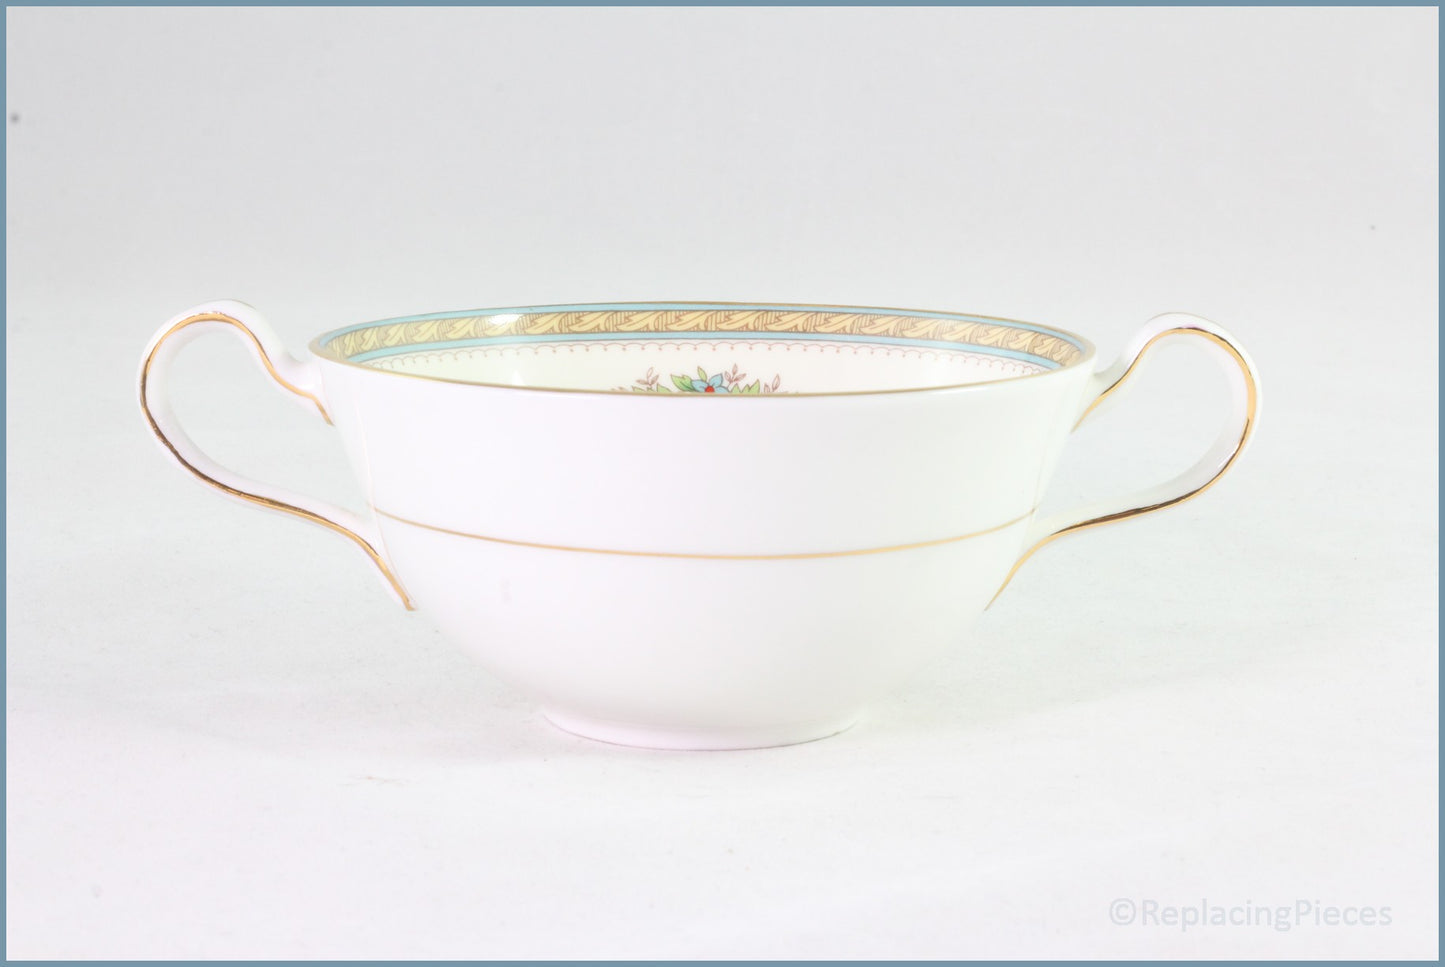 Aynsley - Henley - Soup Cup